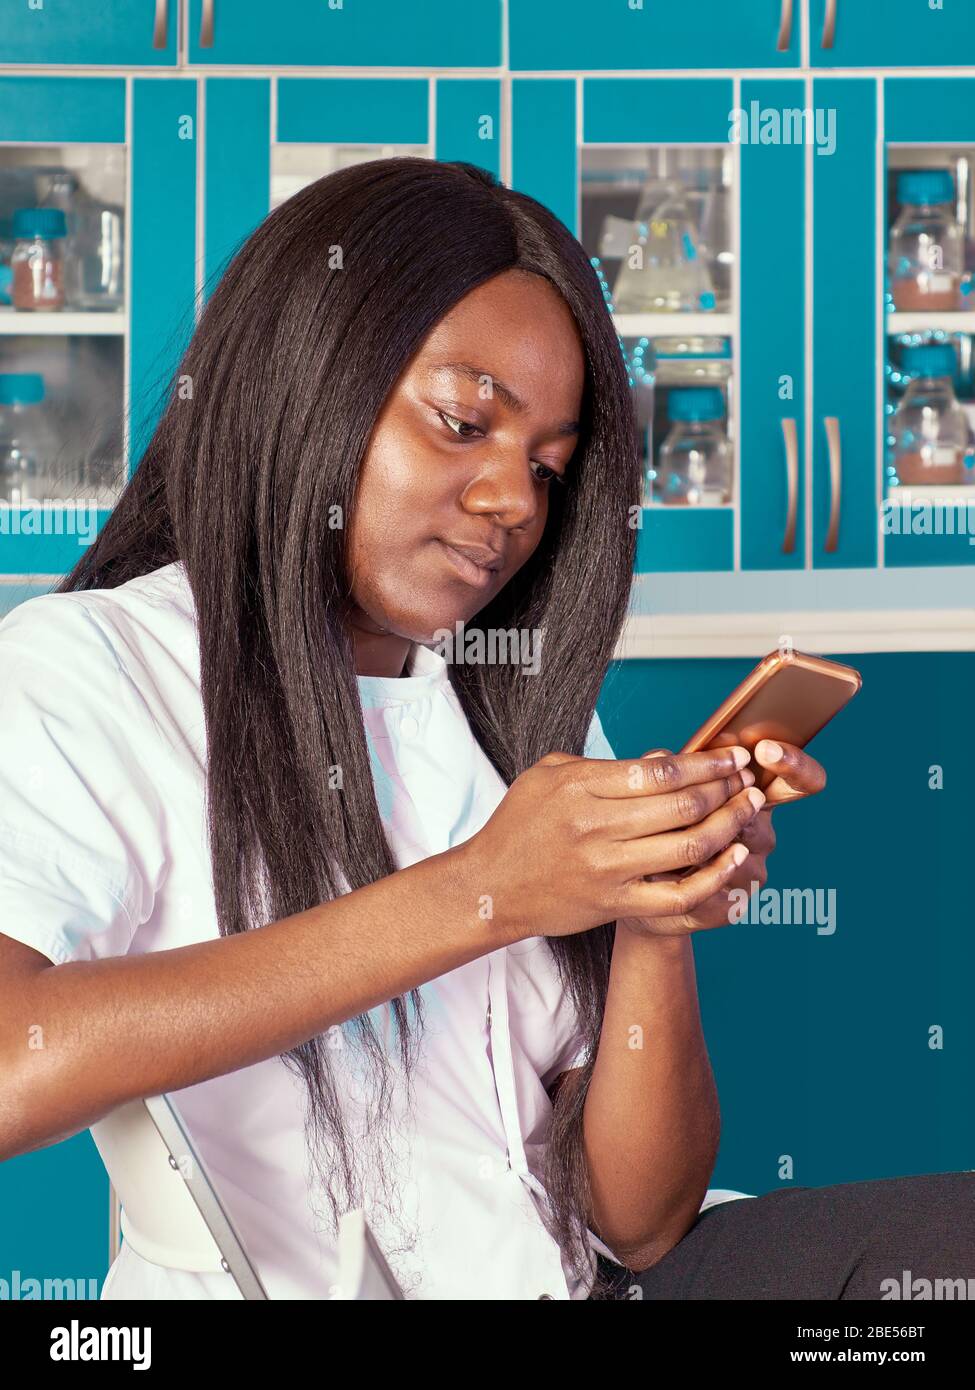 Young attractive African female scientist, graduate or medical student with mobile phone. The woman is smiling while using smartphone in scientific ch Stock Photo